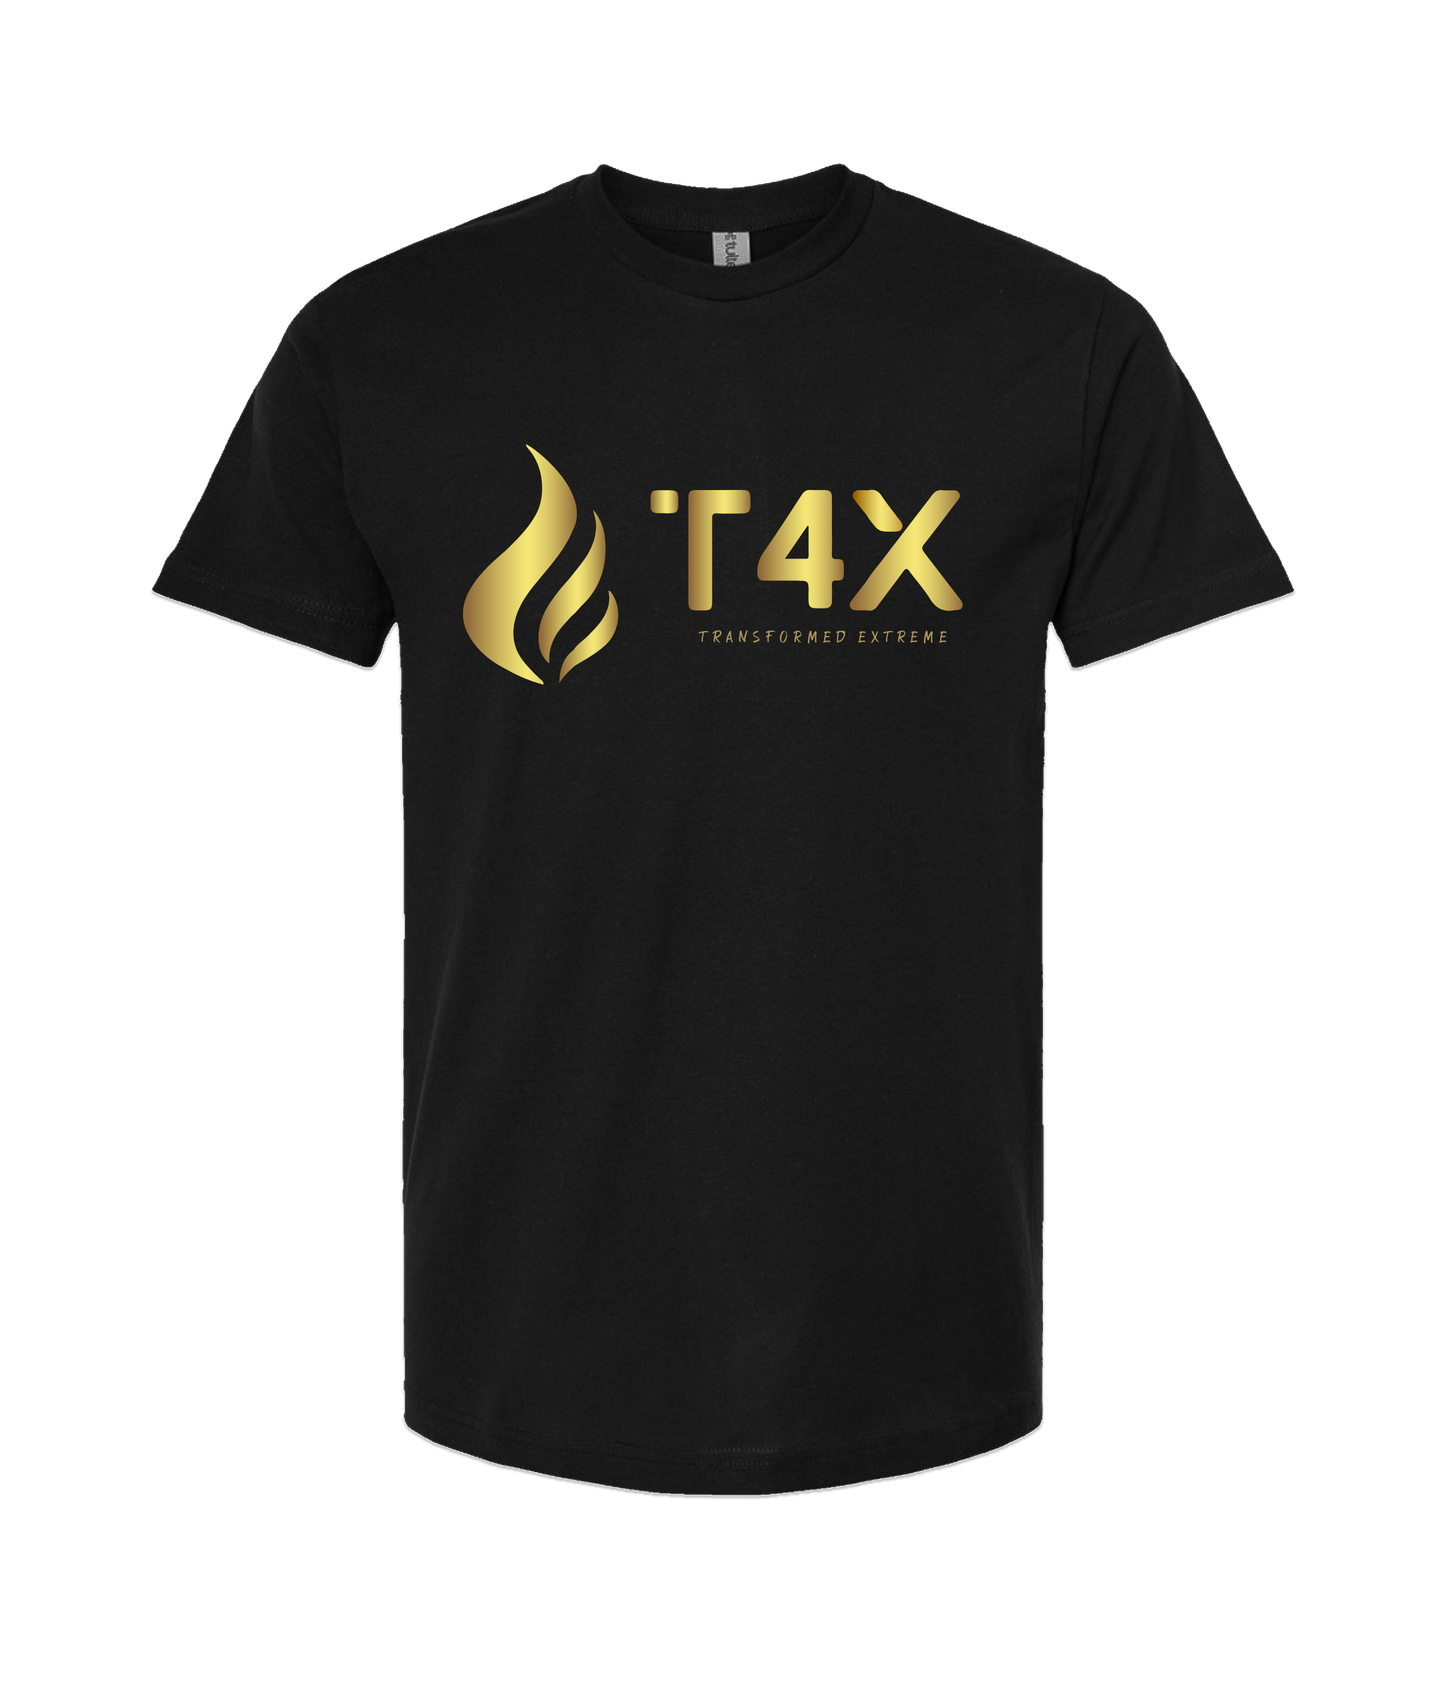 T4E (Trans4ormed Extreme) - GOLD FLAME - Black T Shirt